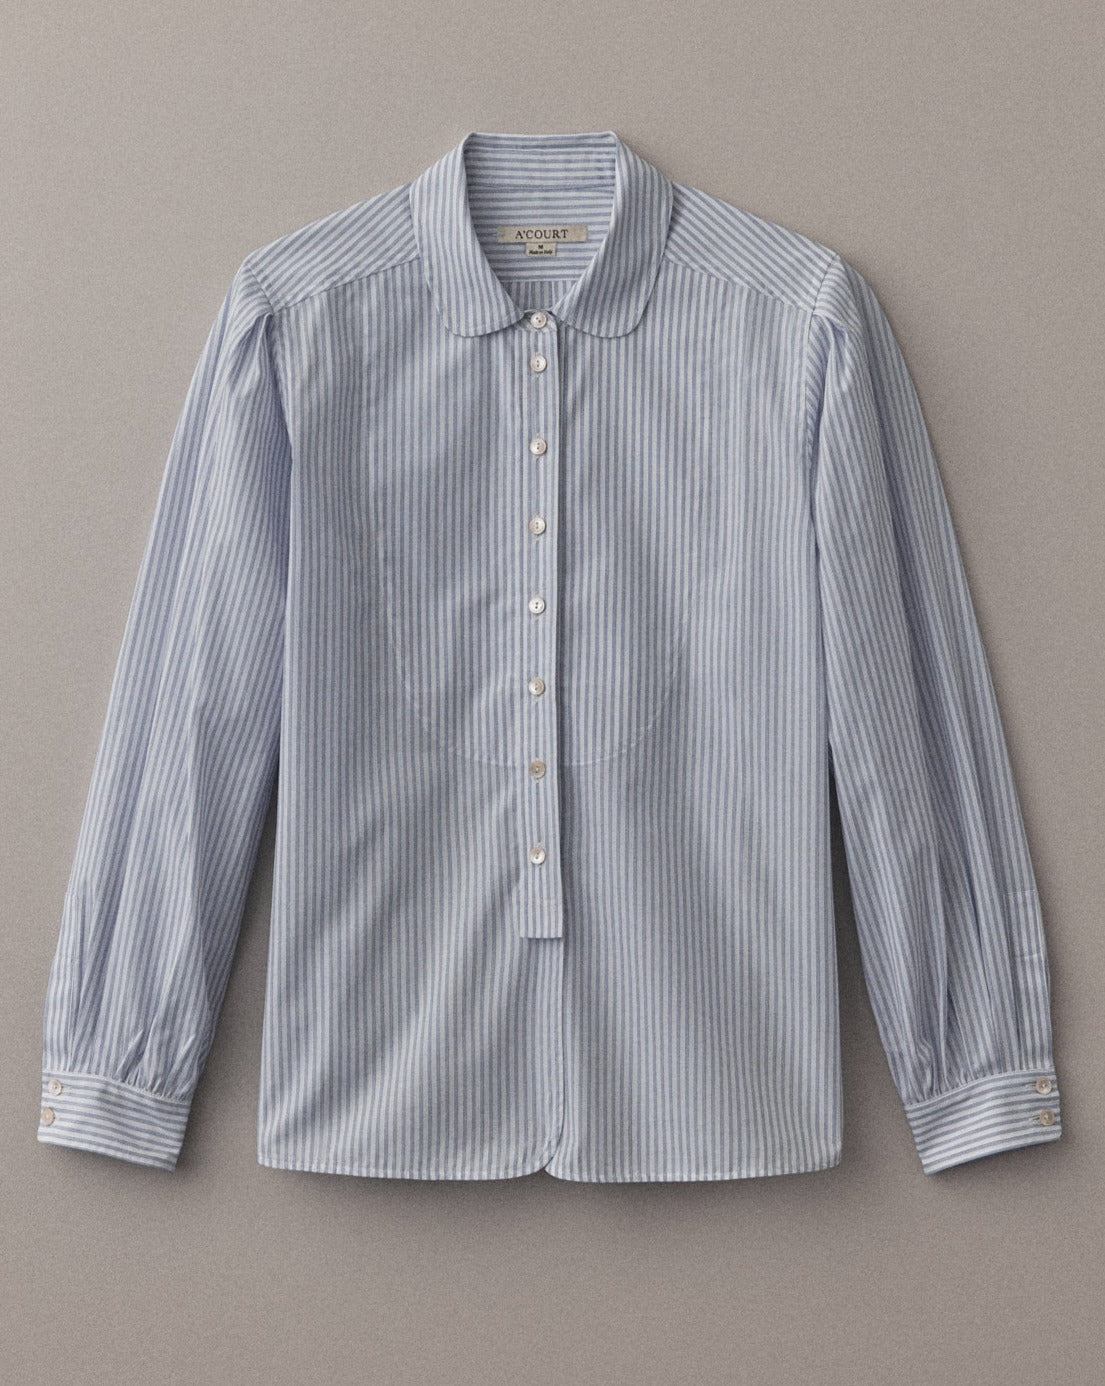 A long sleeve white striped button down with a classic menswear silhouette lies on a light brown field.